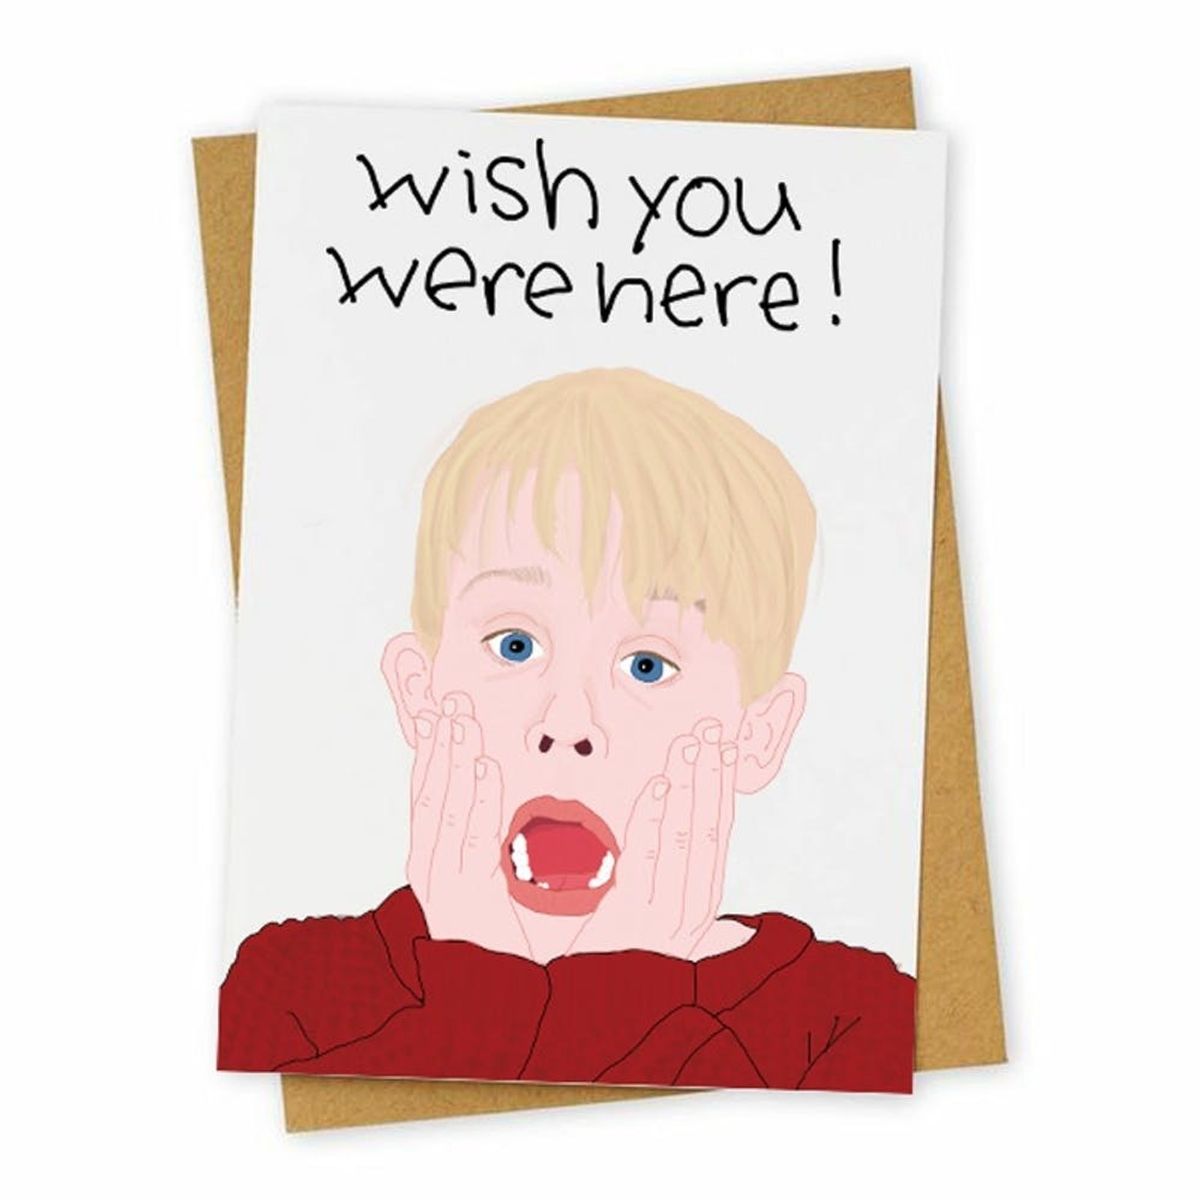 17 of the Best Holiday Cards for Every Occasion